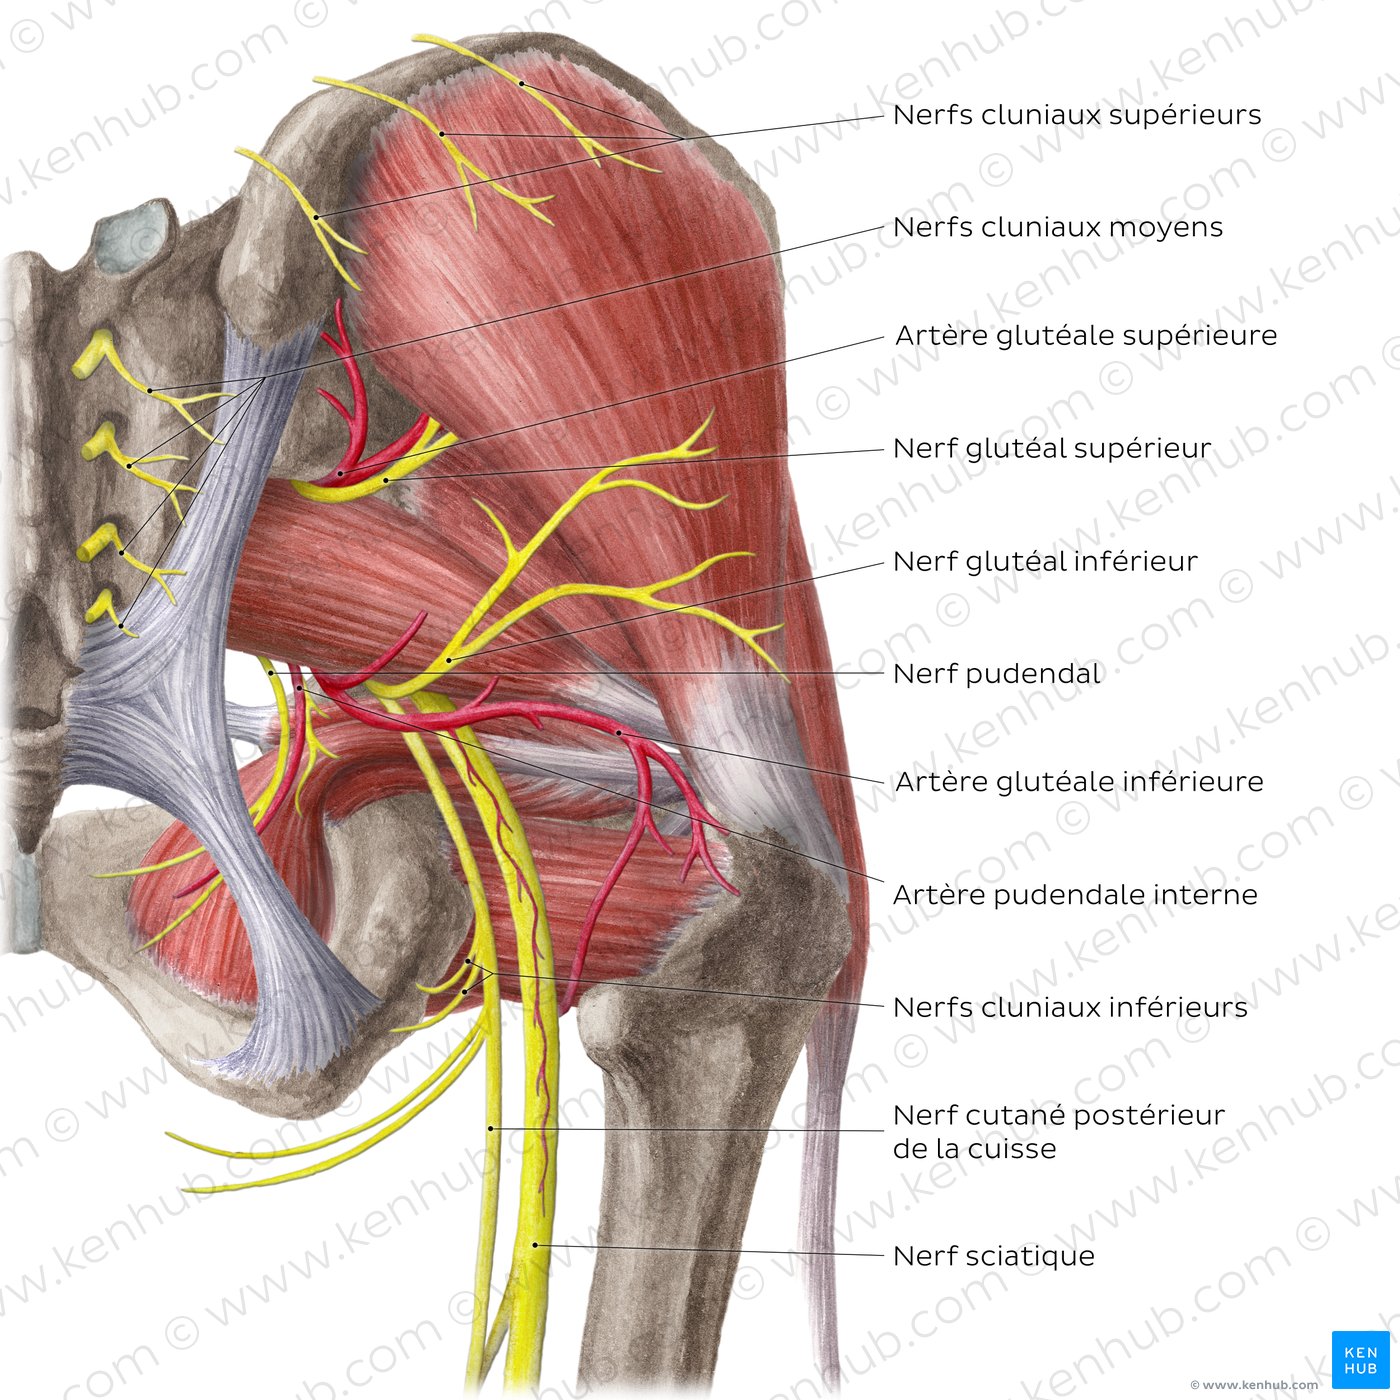 Neurovasculature of the hip and thigh (posterior view)